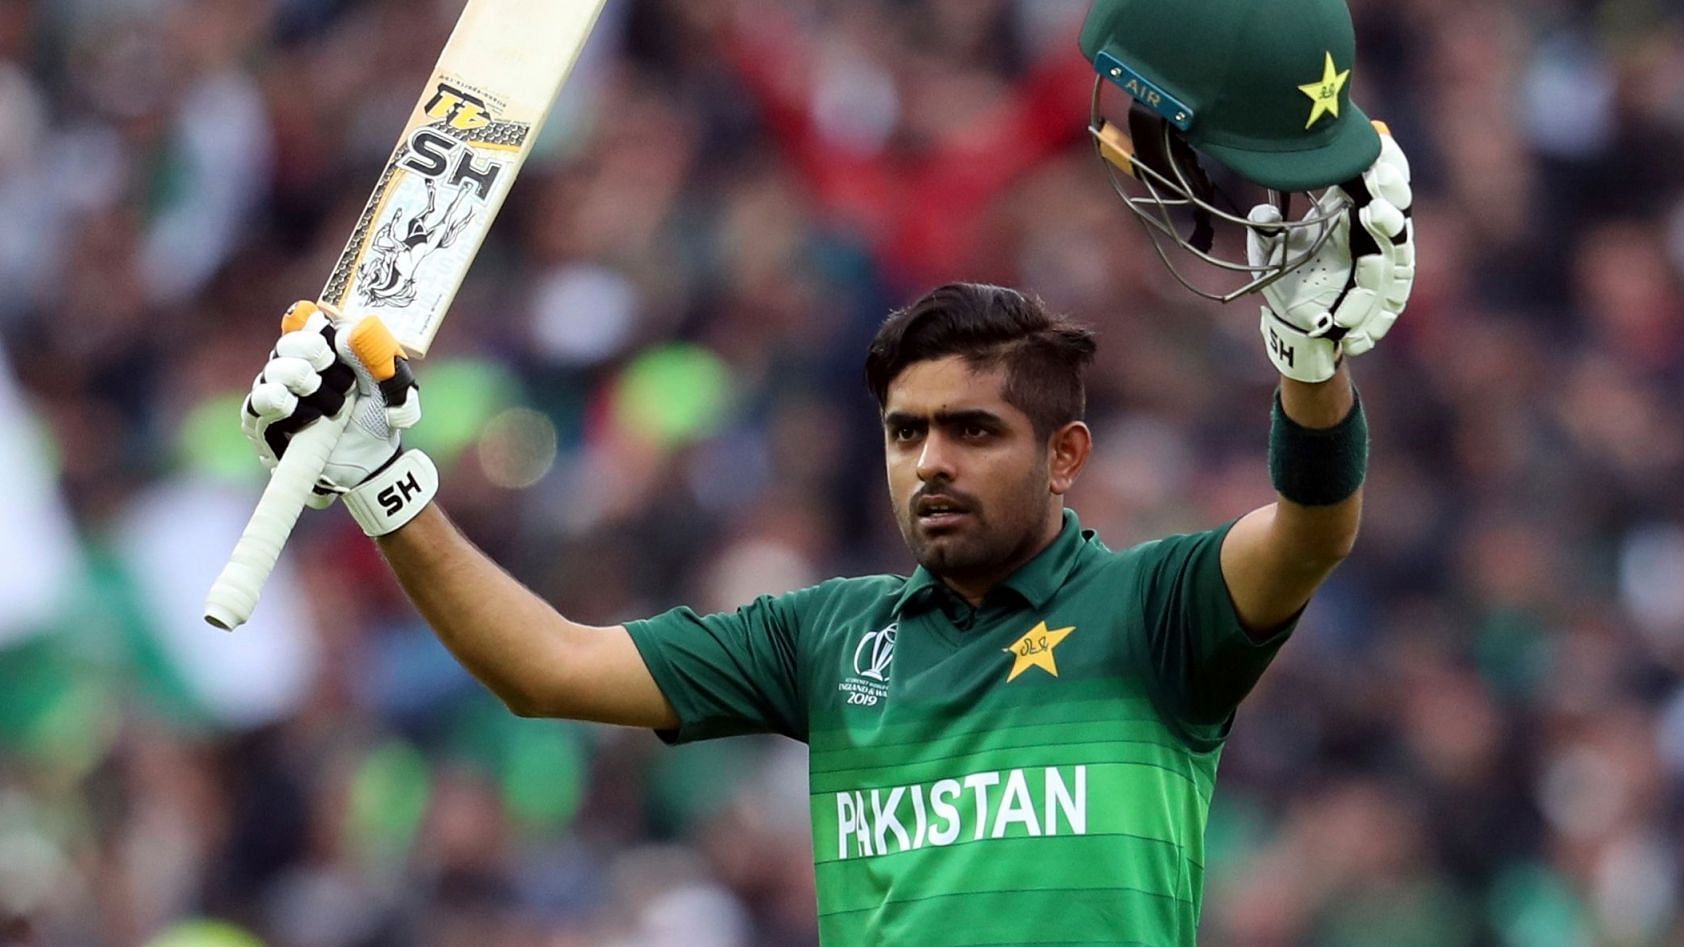 Babar Azam will aim to become the fastest to score 2,000 T20I runs when his team play Zimbabwe from Wednesday.